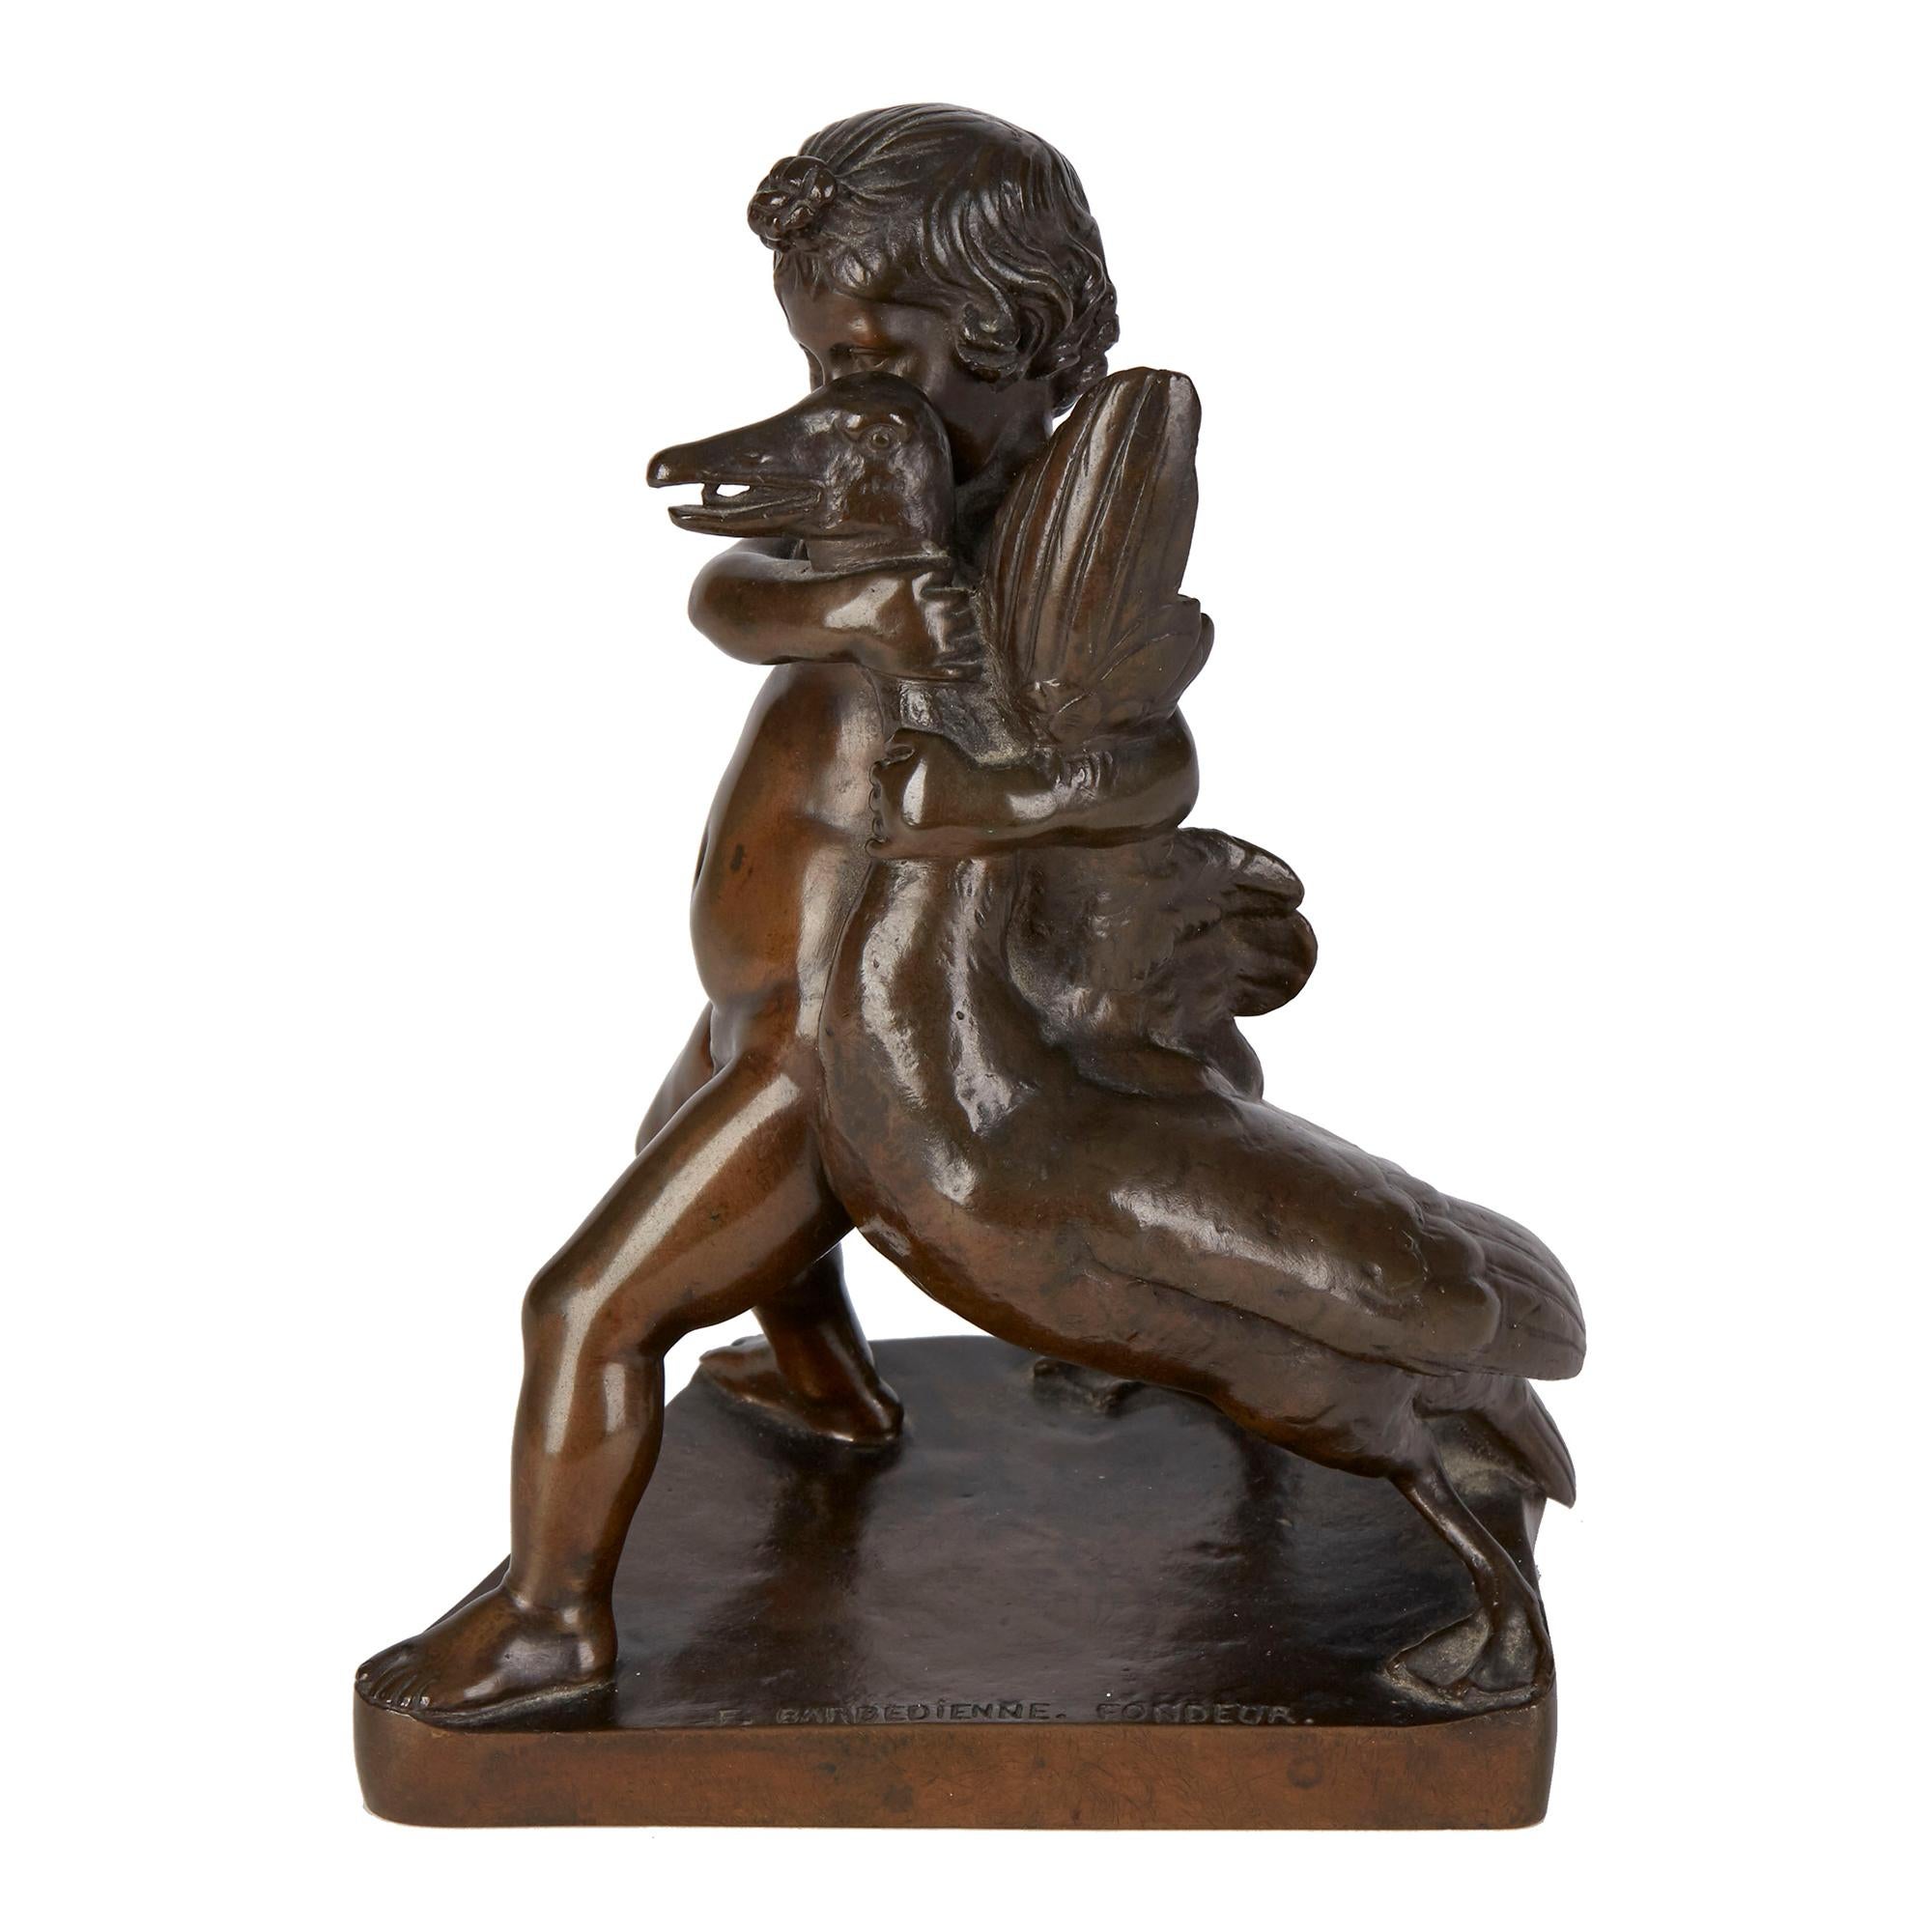 A finely patinated French antique bronze by Ferdinand Barbedienne portraying a a young boy caressing a large goose. The figure is mounted on an angled and shaped base and is signed 'F. BARBEDIENNE. FONDEUR.' to the base. French, Ferdinand